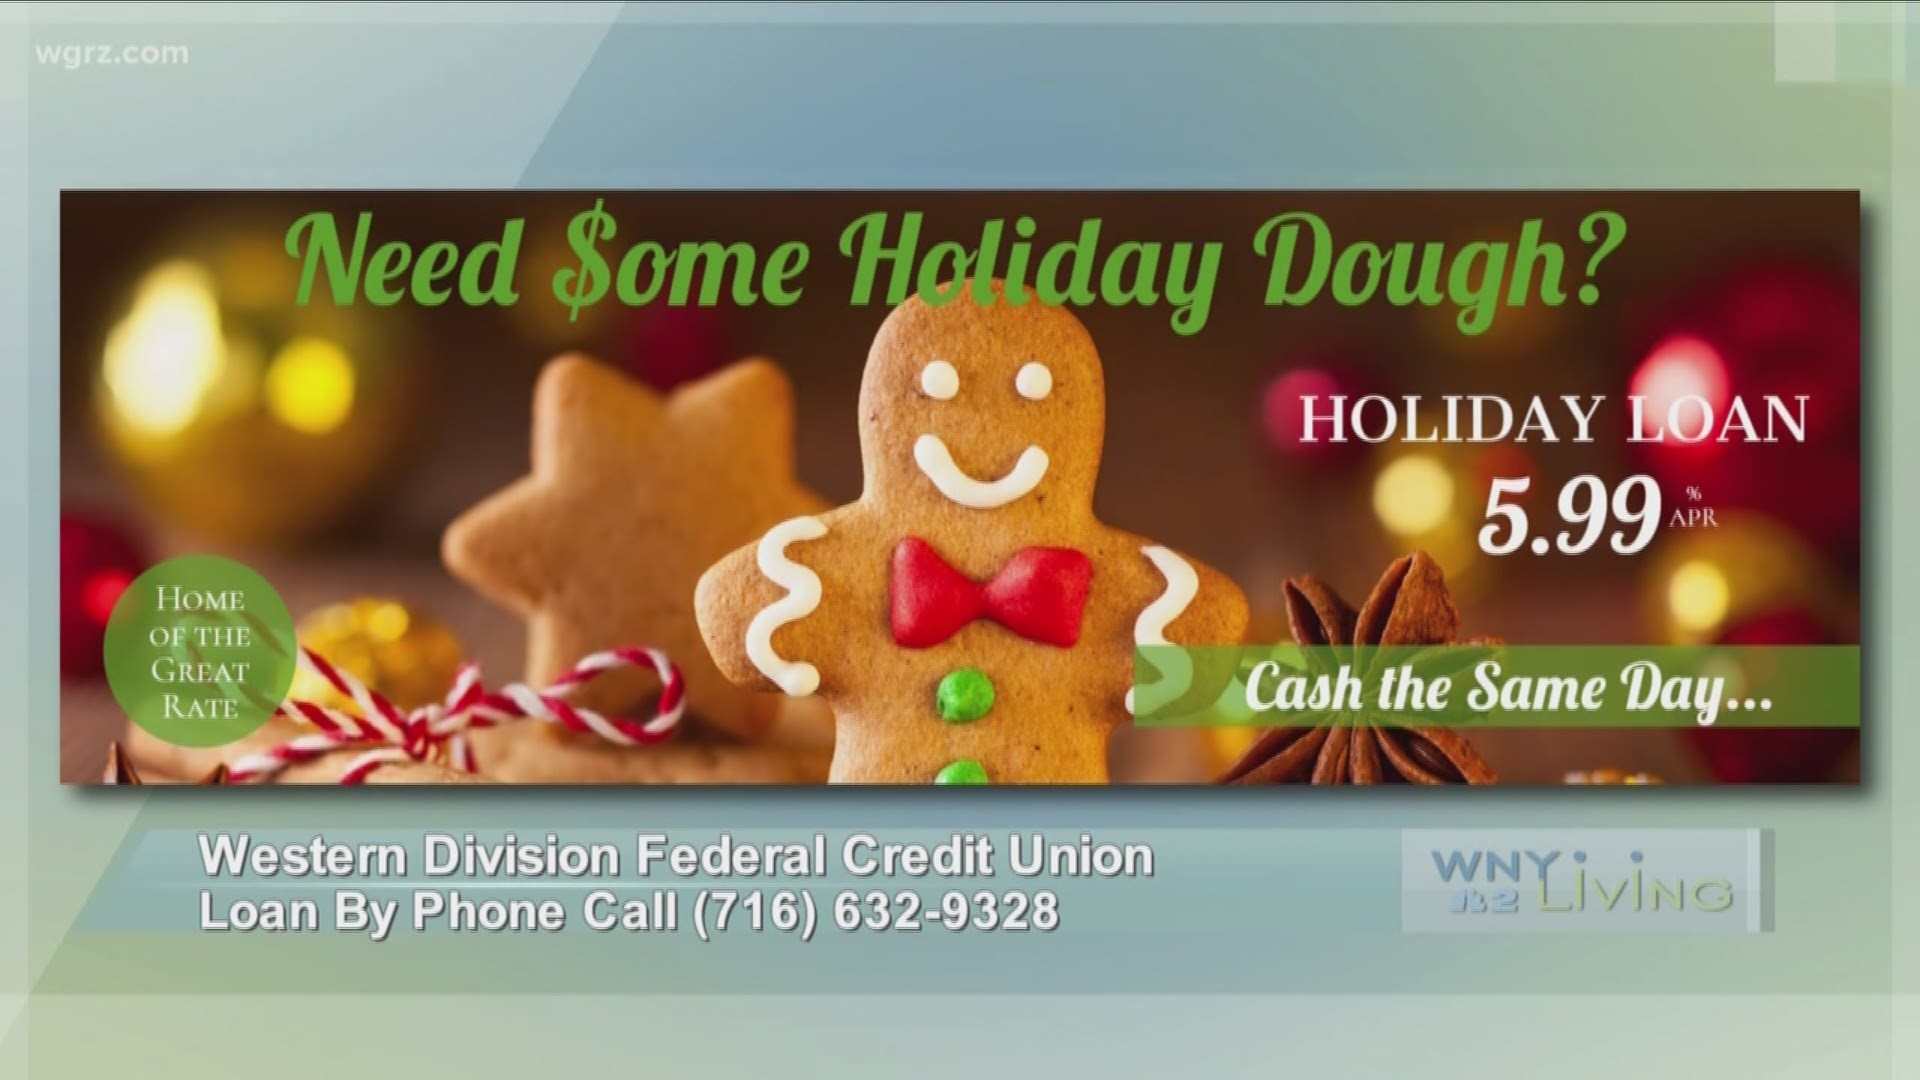 WNY Living - November 5 - Western Division Federal Credit Union